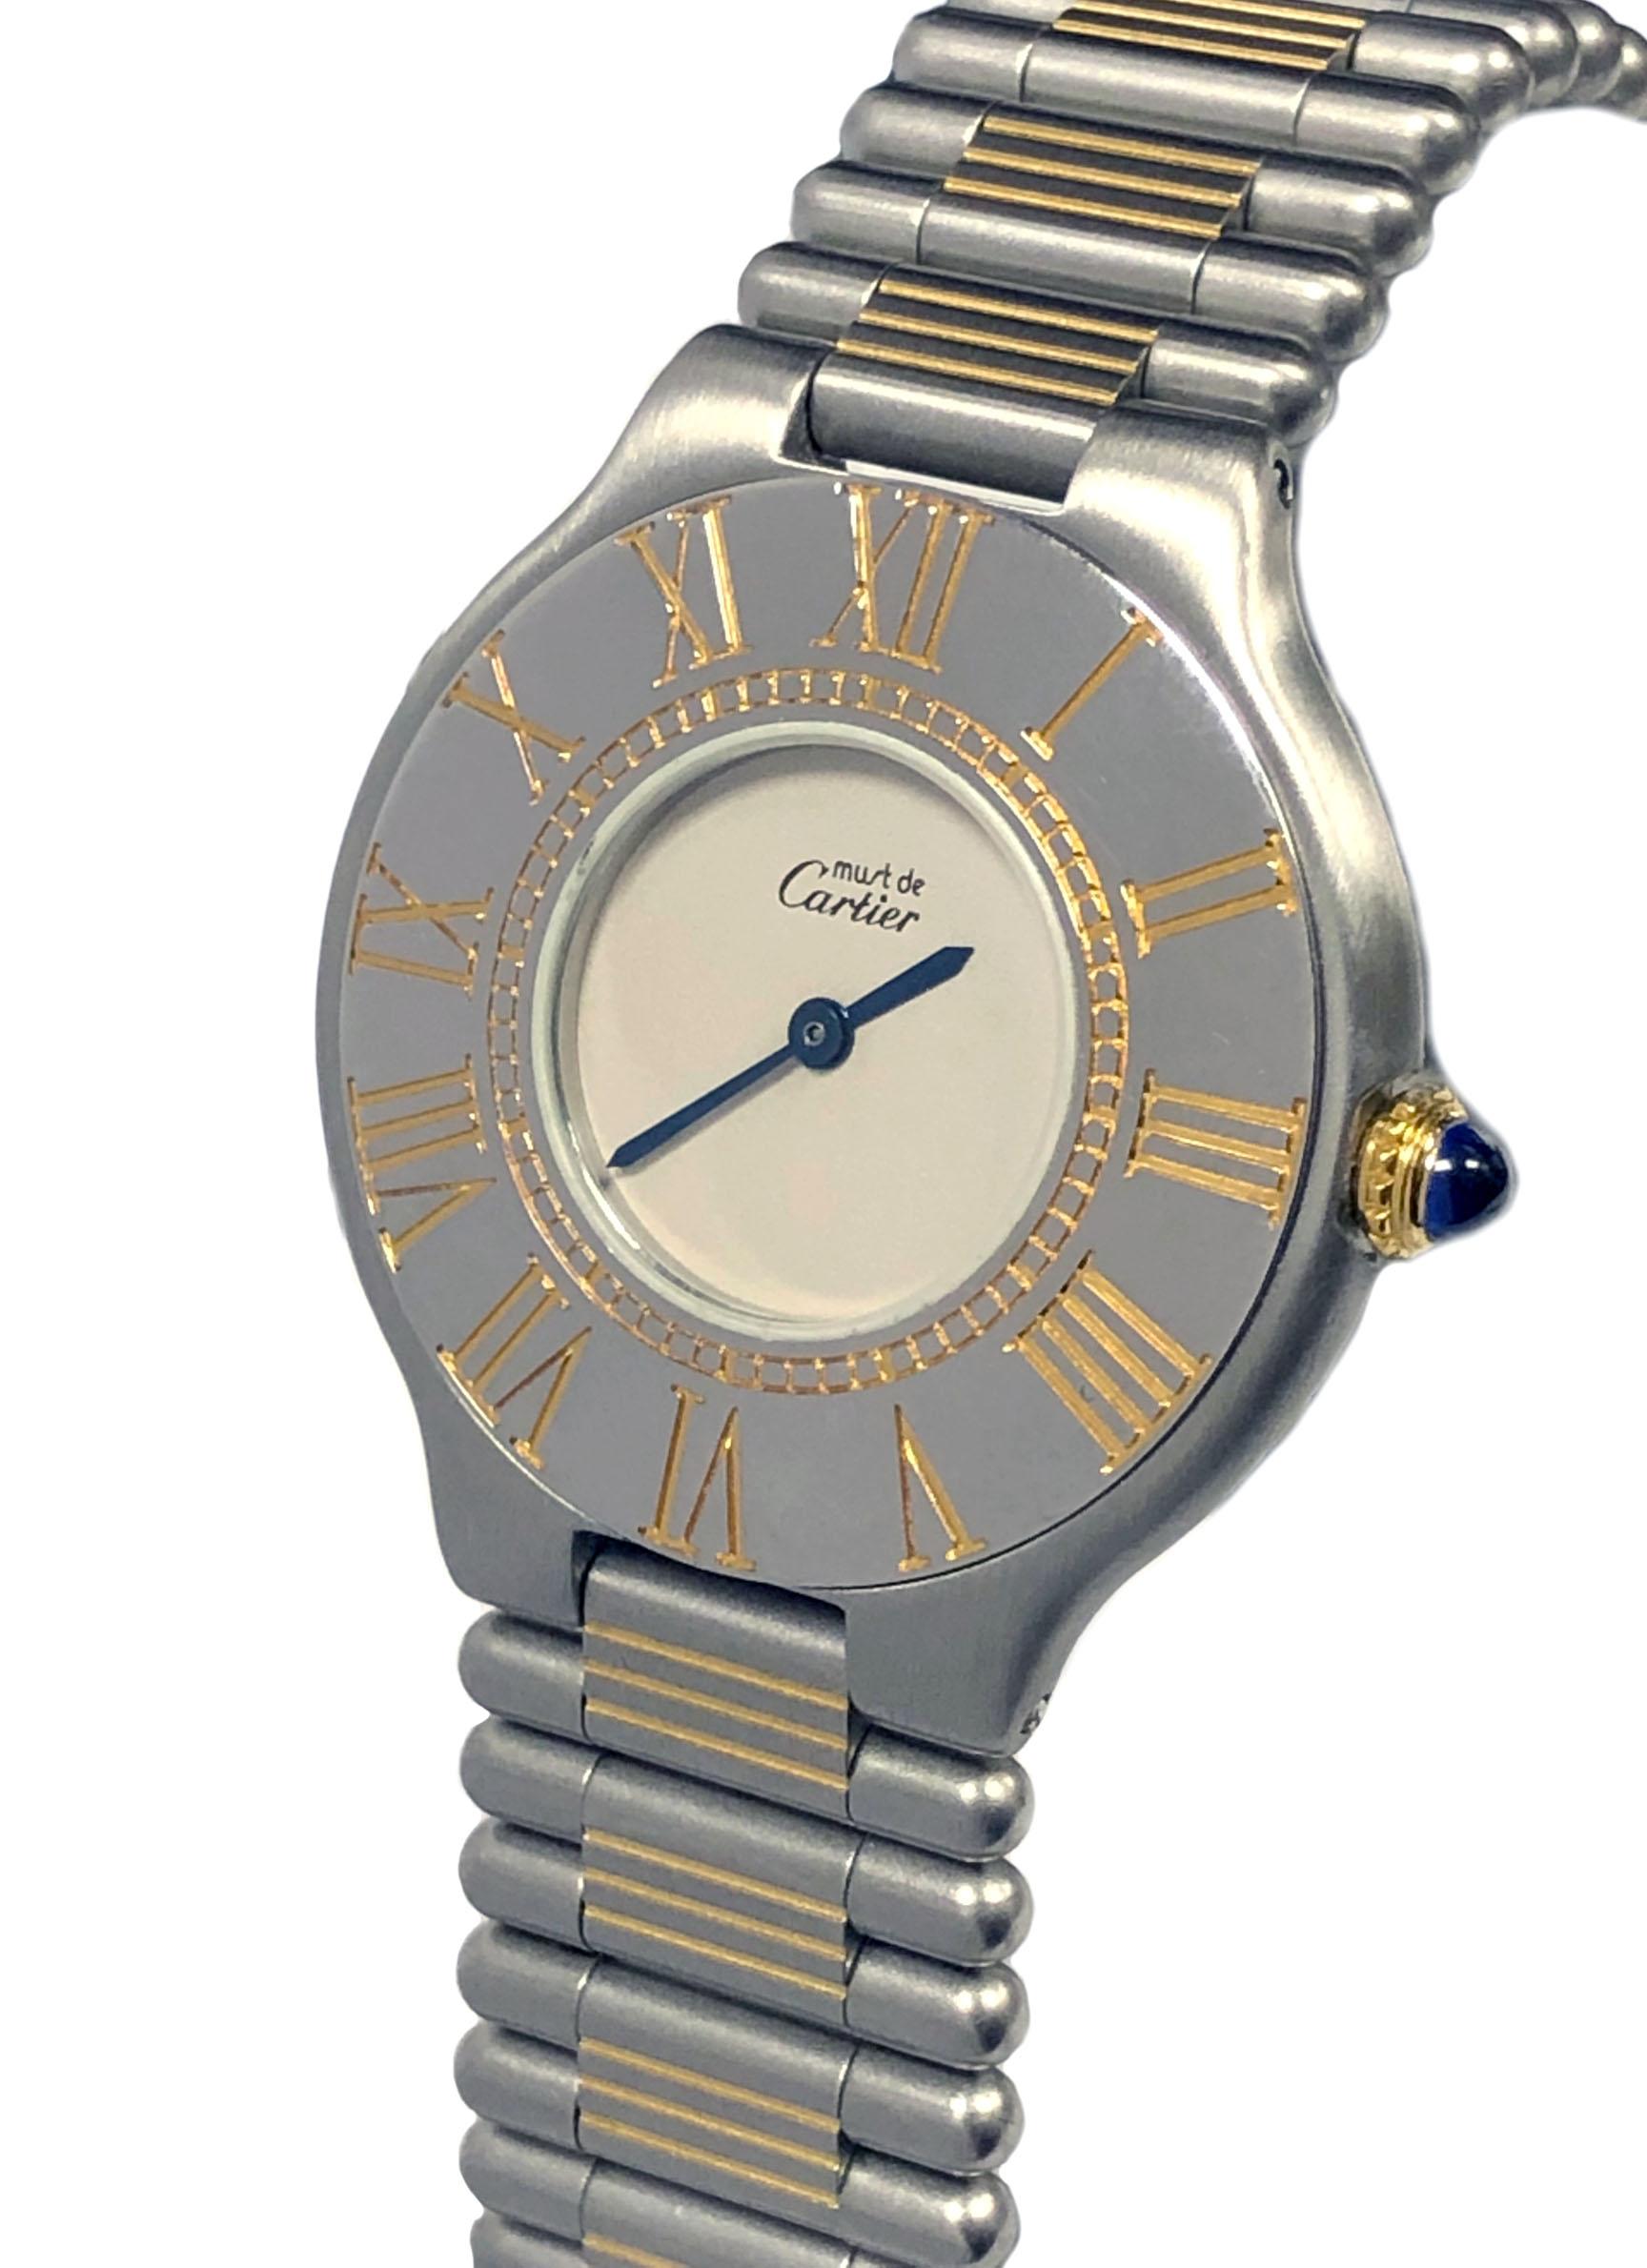 Circa 1990 Cartier, Must De Cartier 21 Mid Size Wrist watch, 31 M.M Stainless Steel  2 piece case with Gold accents and a Gold crown set with a sapphire. Quartz Movement, white Dial. 5/8 inch wide Steel and Gold link bracelet with Deployment fold